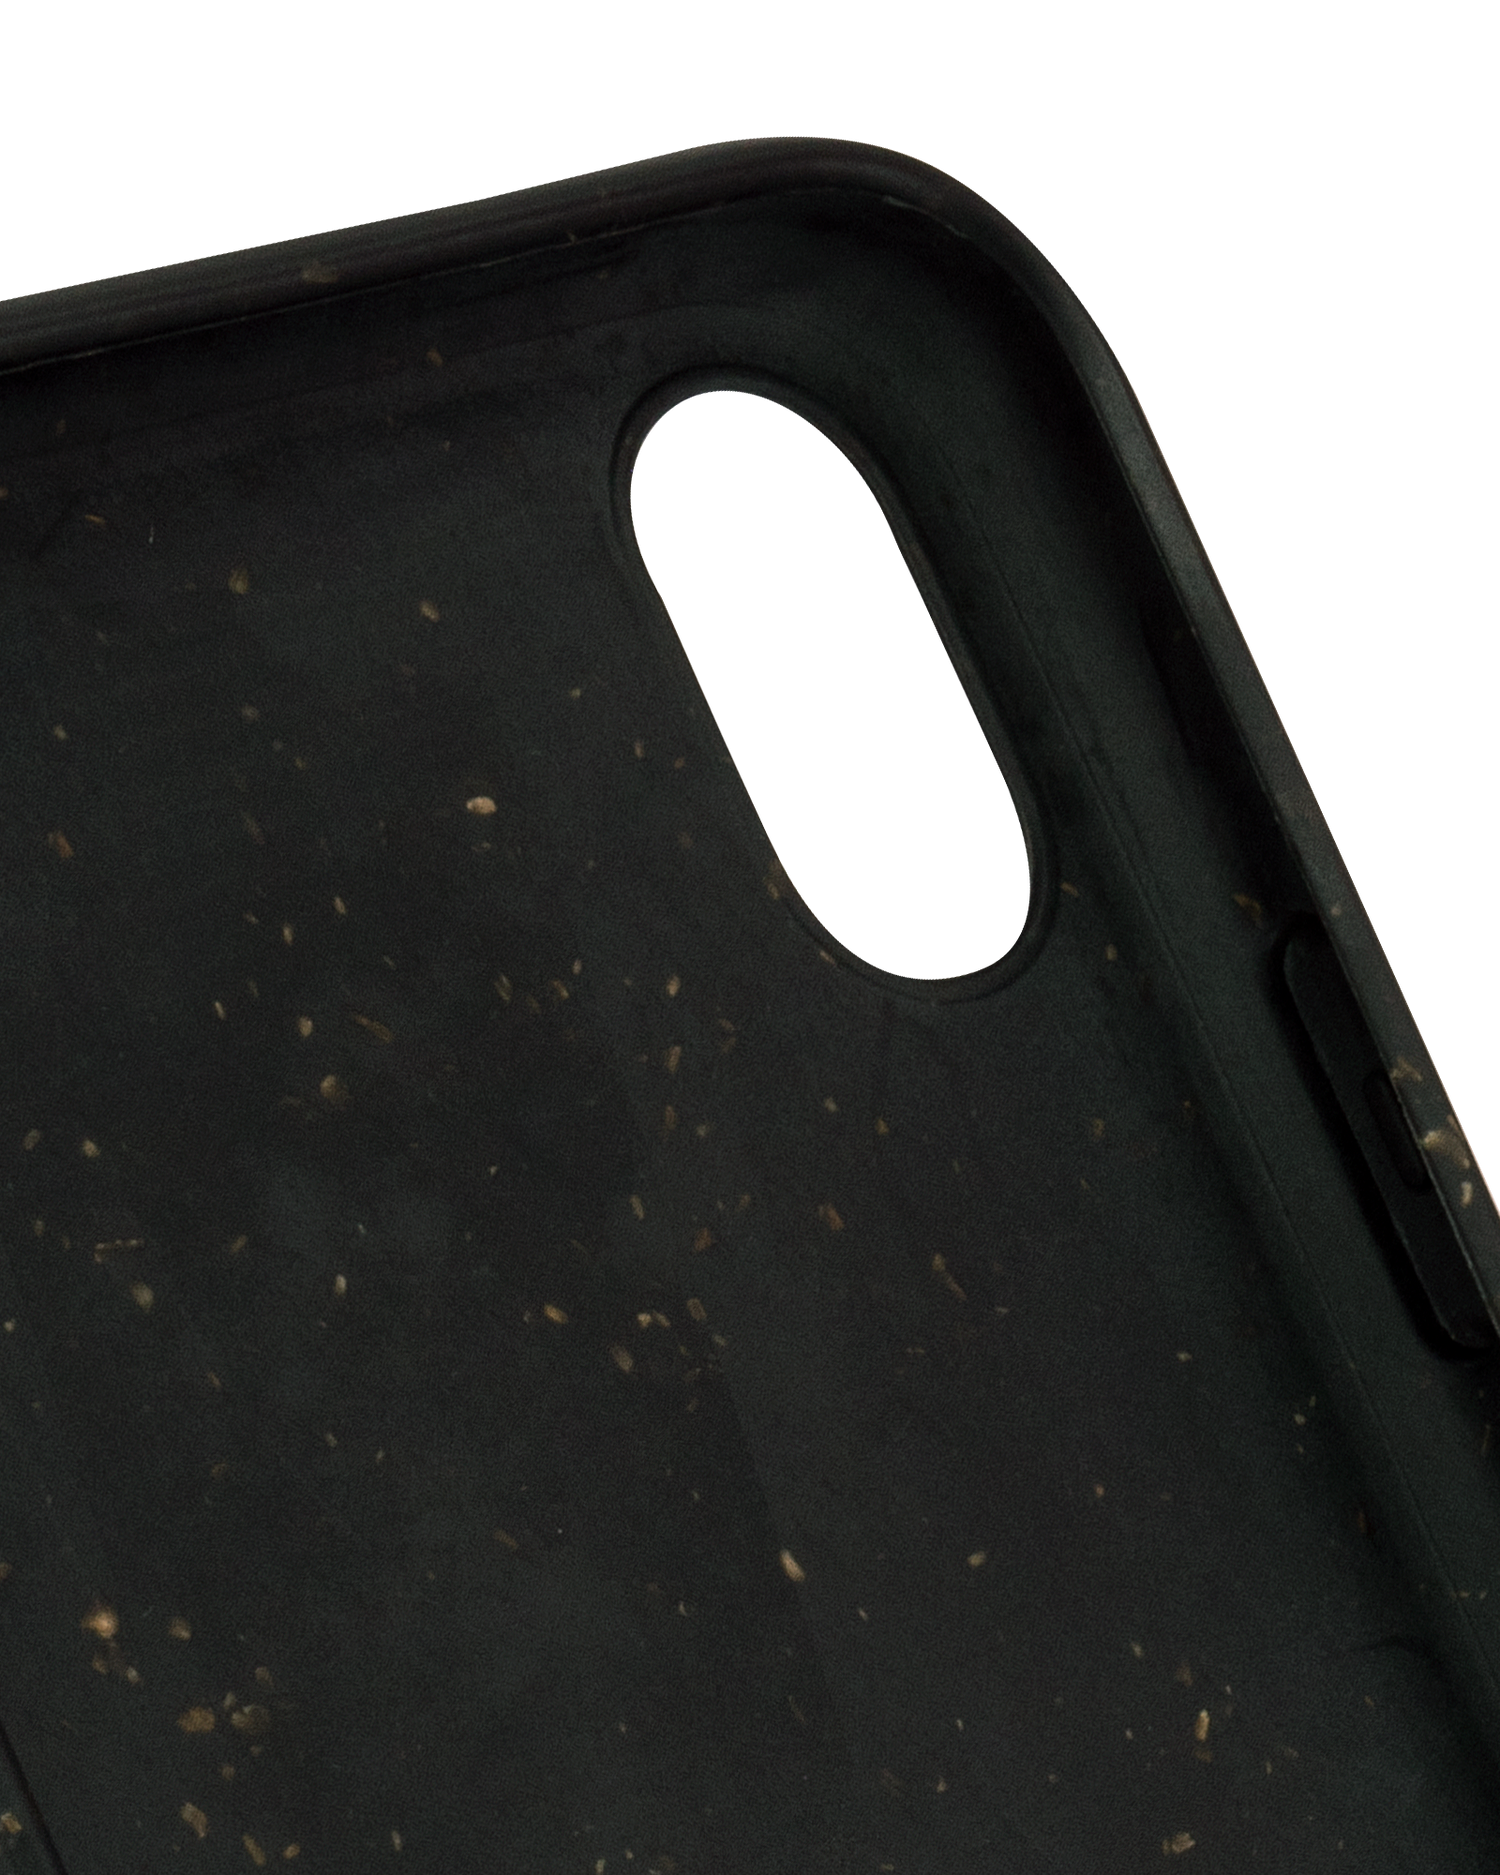 Black Eco-Friendly Phone Case for Apple iPhone XR: Details outside